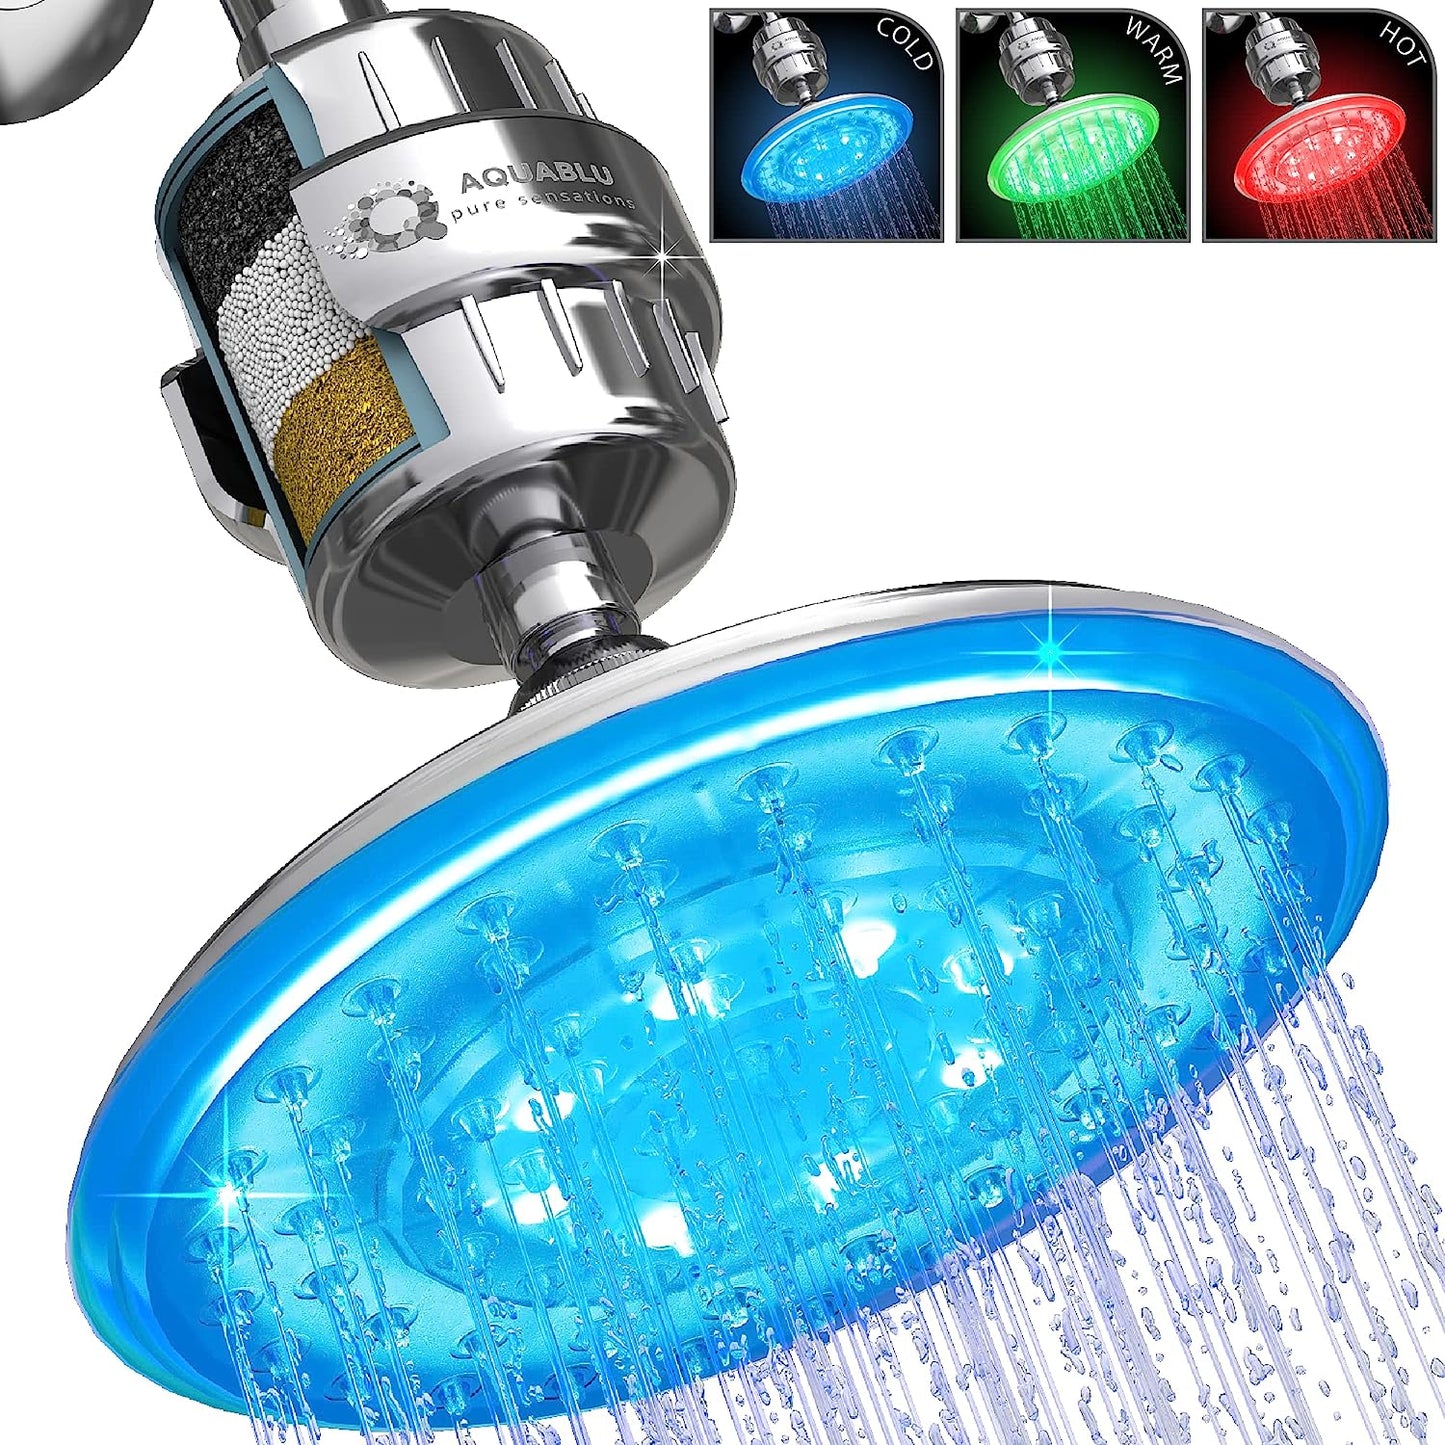 AquaBLU Shower Head - Color Changing LED, Large 8” with High-Pressure & Heavy Duty Shower Filter, Filtered Shower Head for Hard Water, Heavy Metals, Chlorine & More